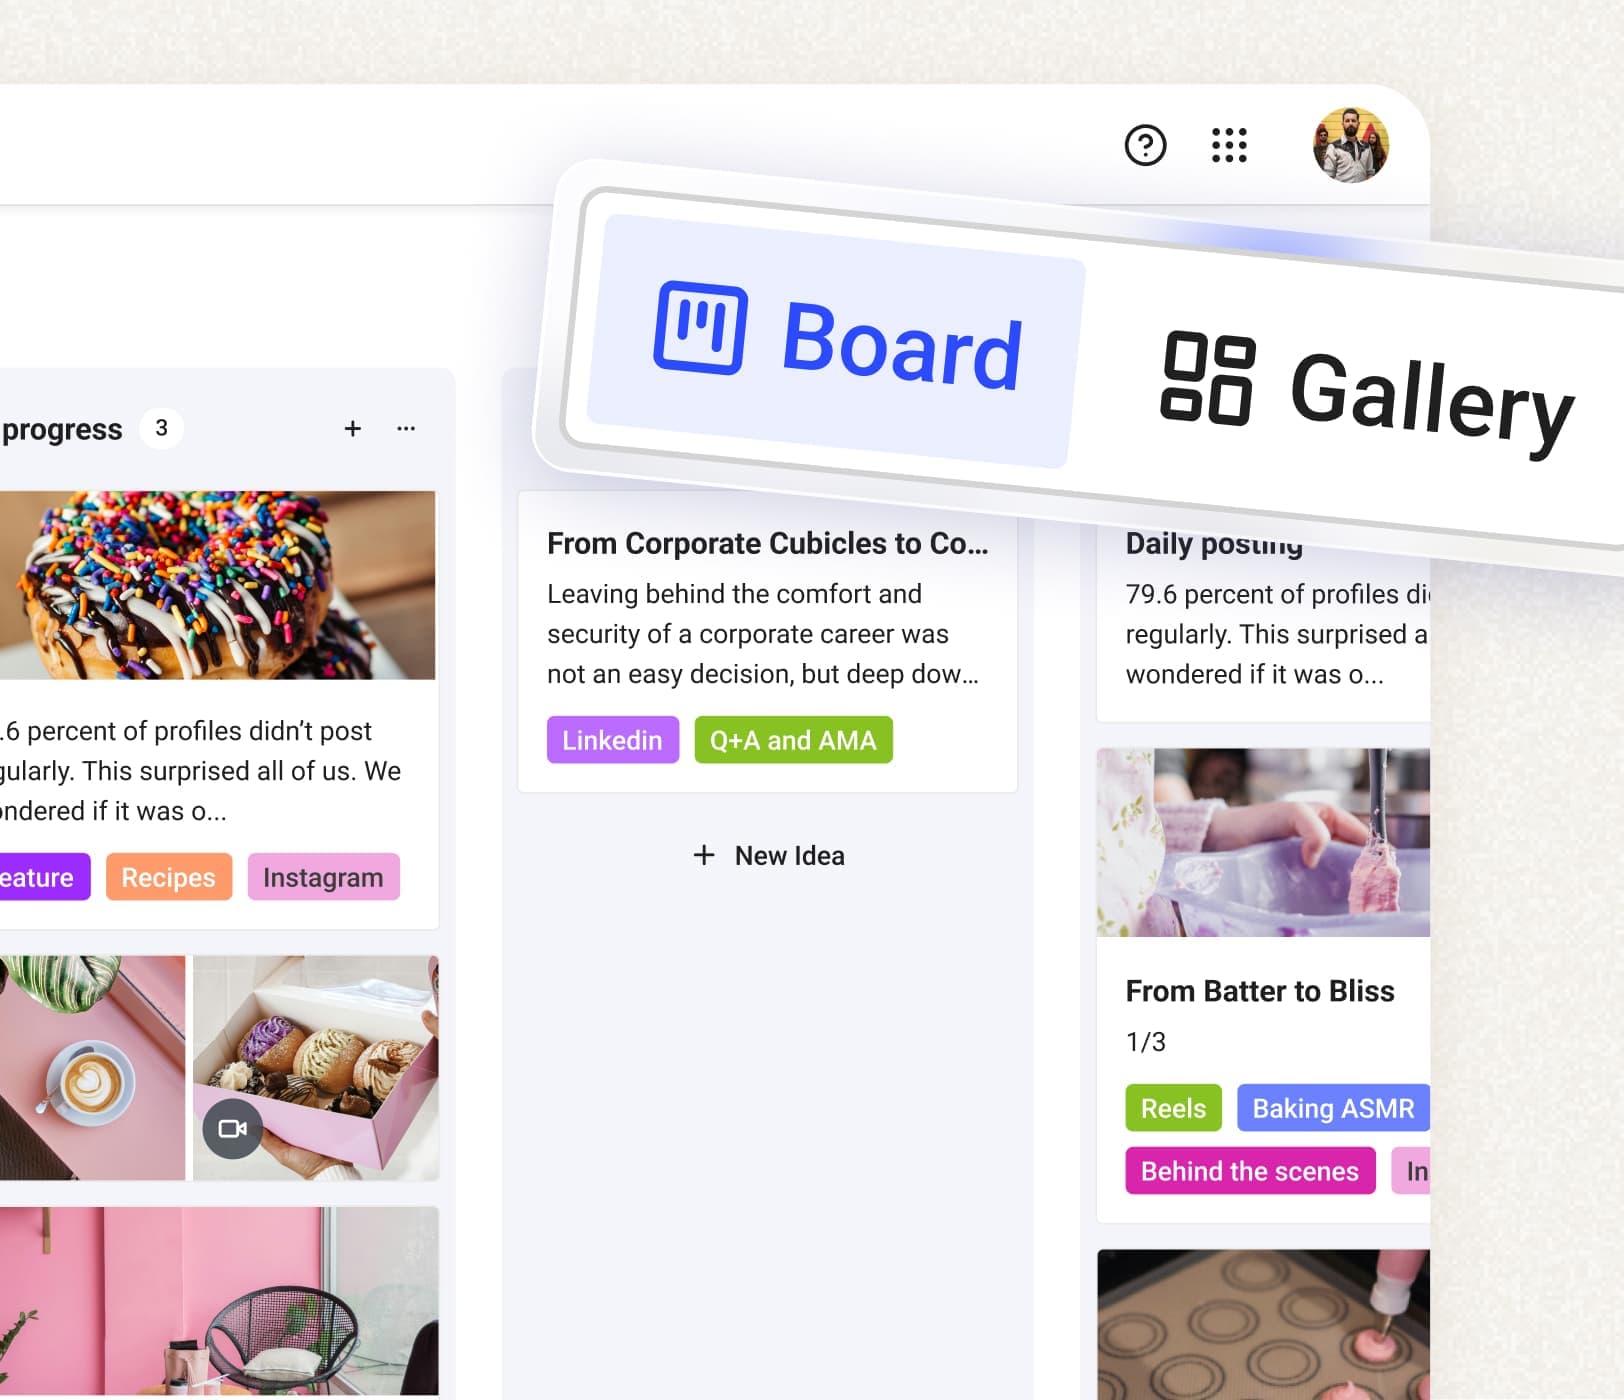 Buffer Create screen with board and gallery views to organize post ideas. The kanban board view has columns for posts in different stages of publishing.